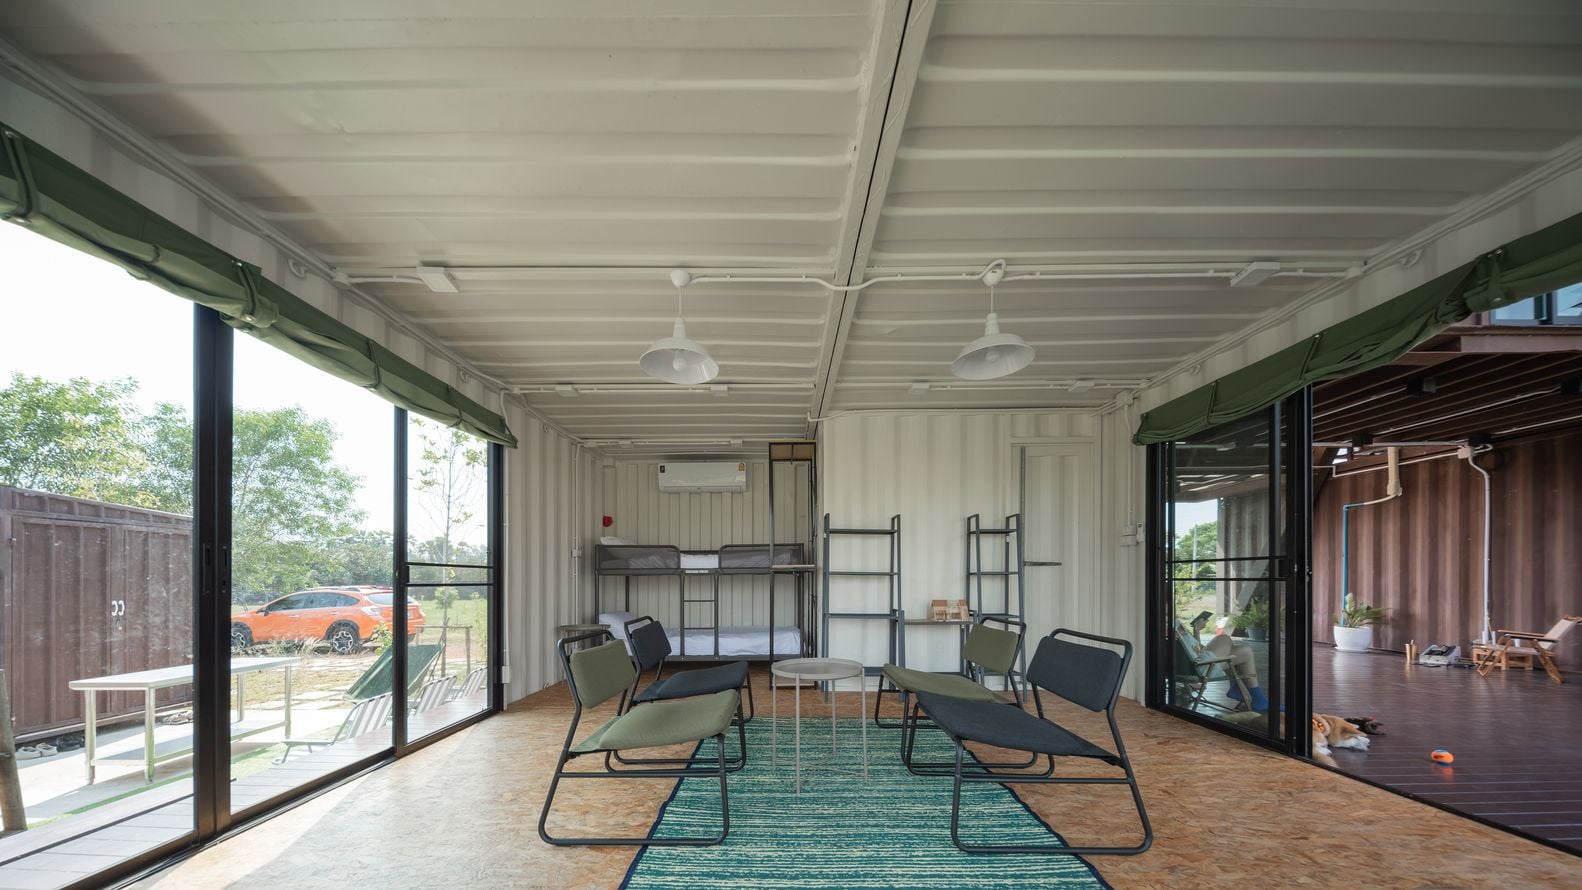 Interior sitting area in the Tung Jai Ork Baab-designed shipping container cabin in rural Thailand.